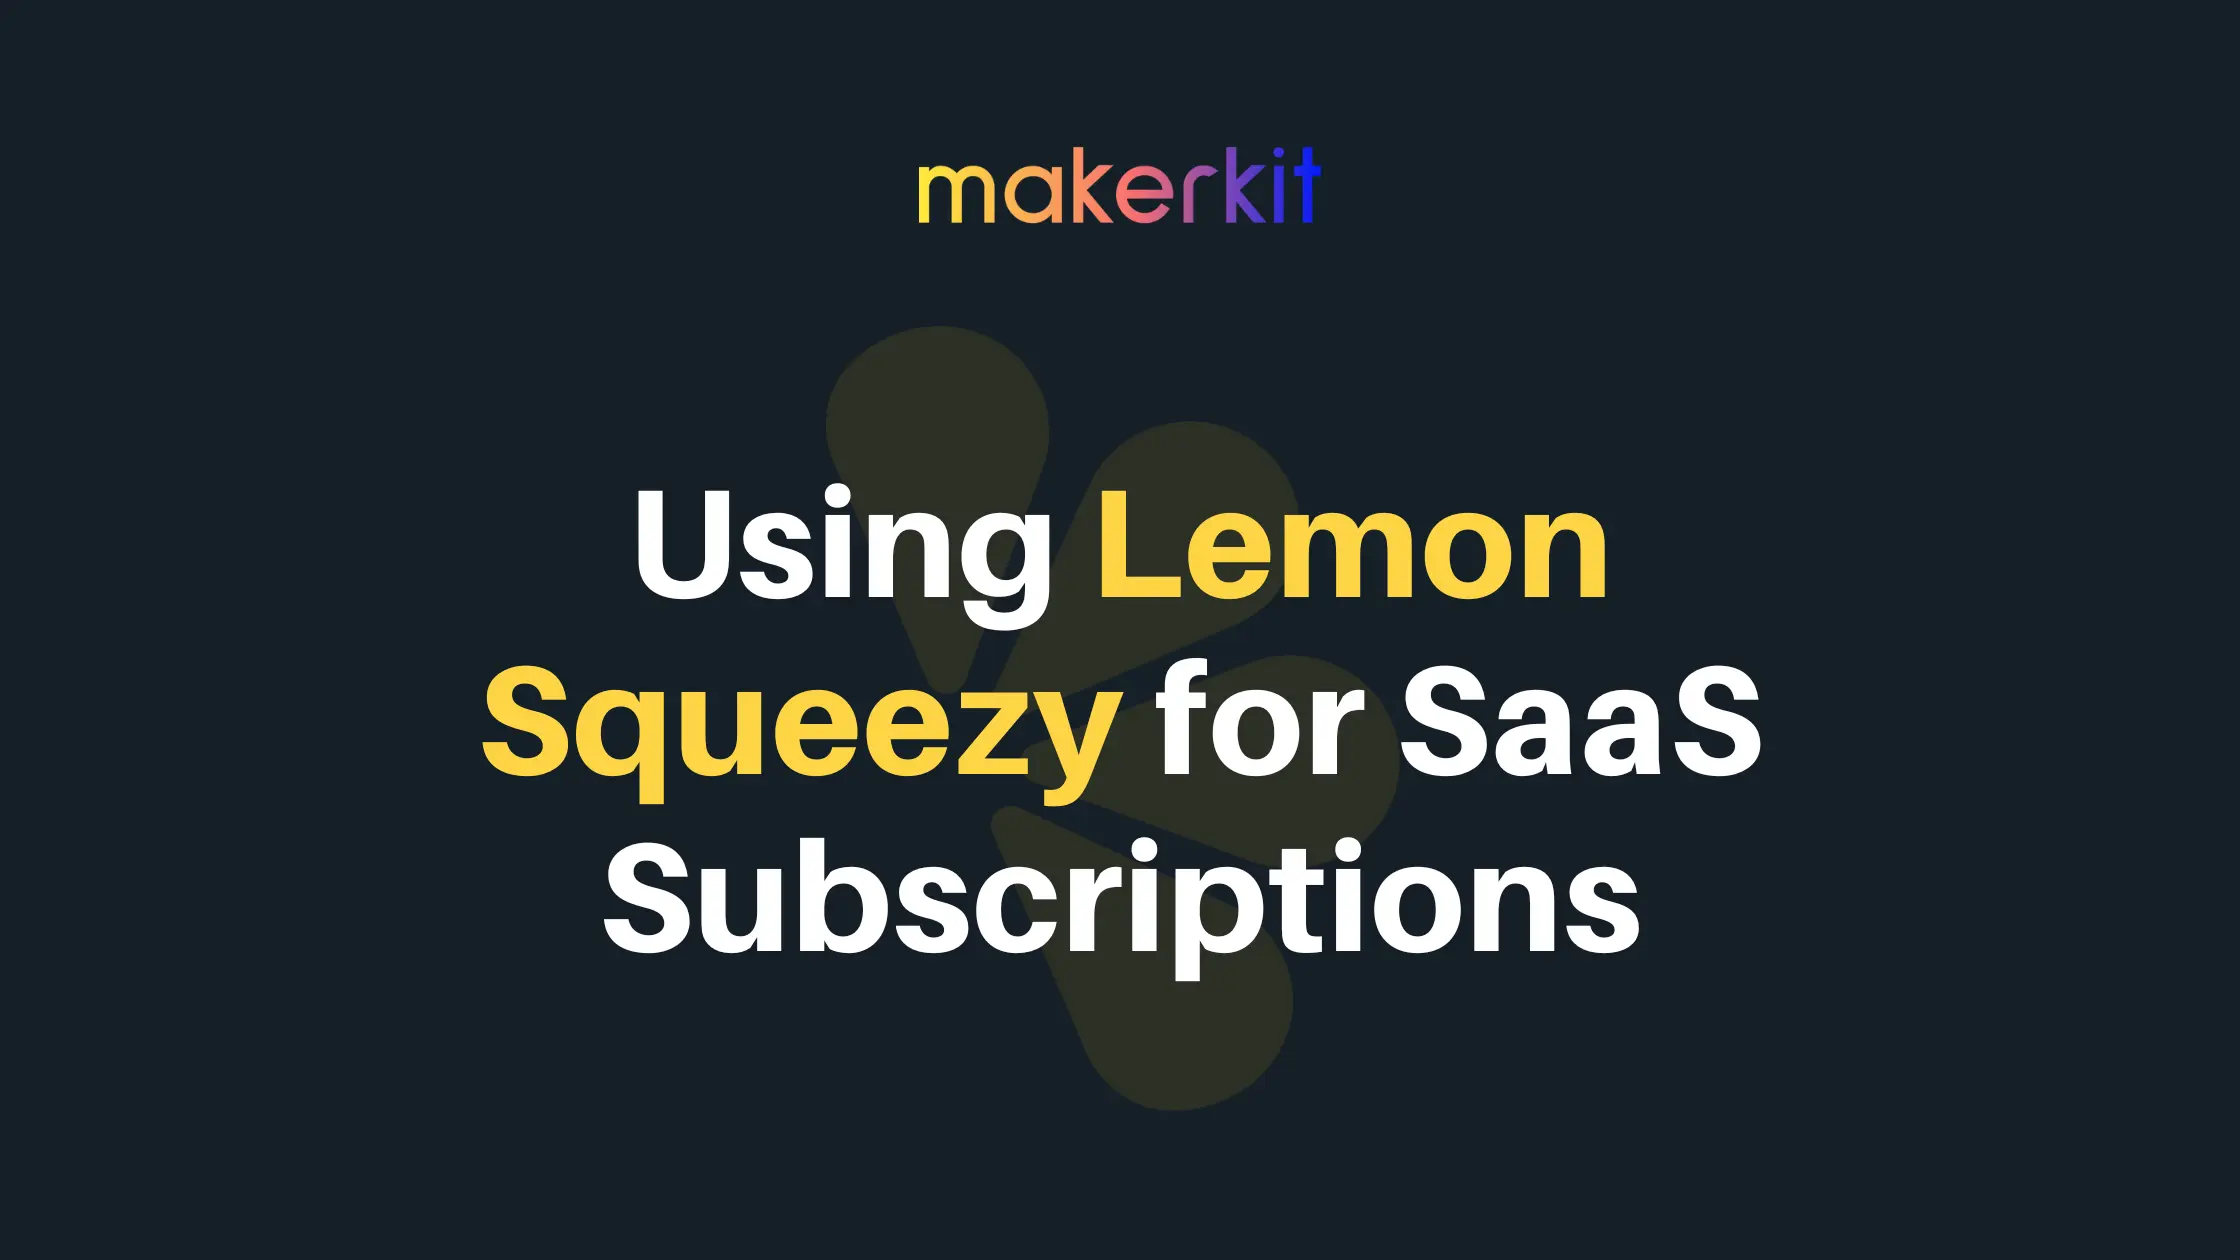 Cover Image for Announcing: Makerkit now supports Lemon Squeezy subscriptions! 🍋